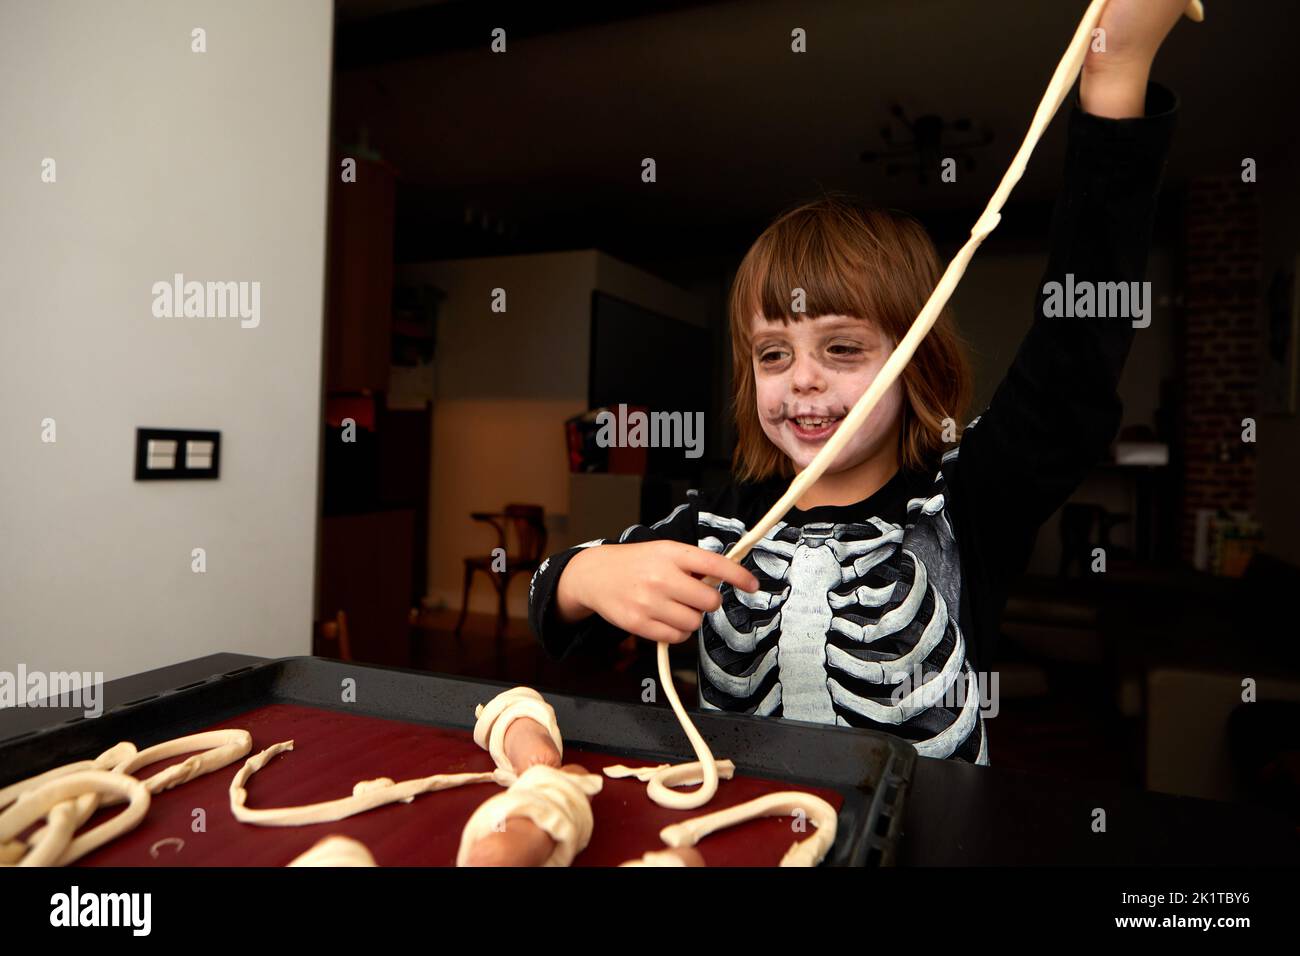 Cheerful kid in skeleton costume and makeup preparing pastries for baking on a baking sheet for the holiday halloween at home Stock Photo